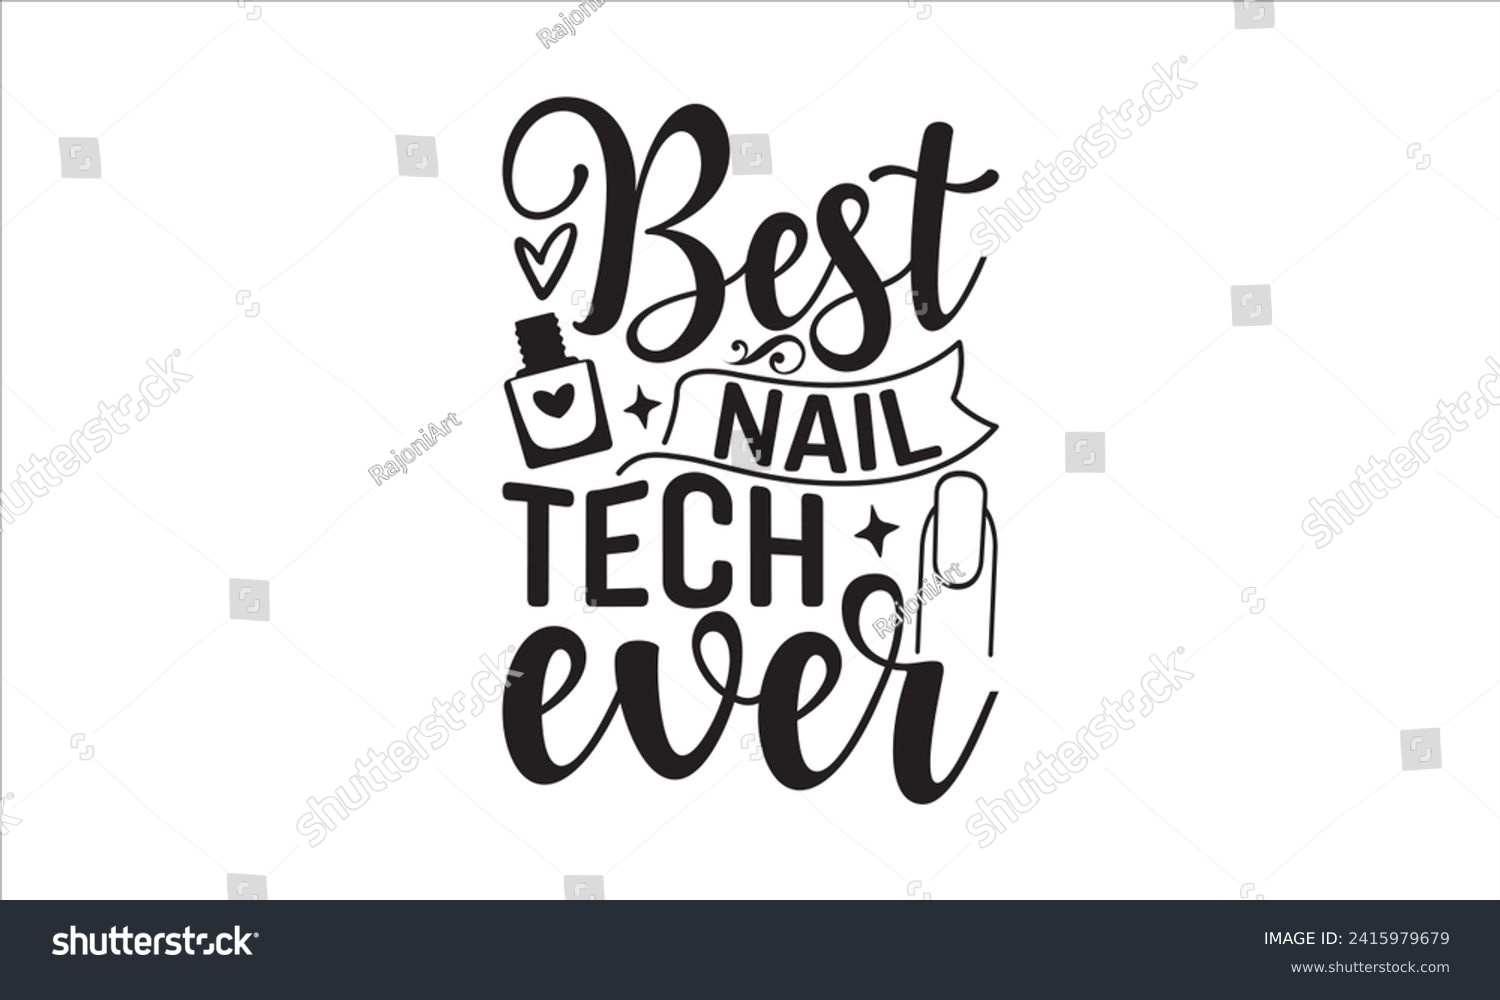 SVG of Best nail tech ever - Nail Tech T-Shirt Design, Modern calligraphy, Vector illustration with hand drawn lettering, posters, banners, cards, mugs, Notebooks, white background. svg